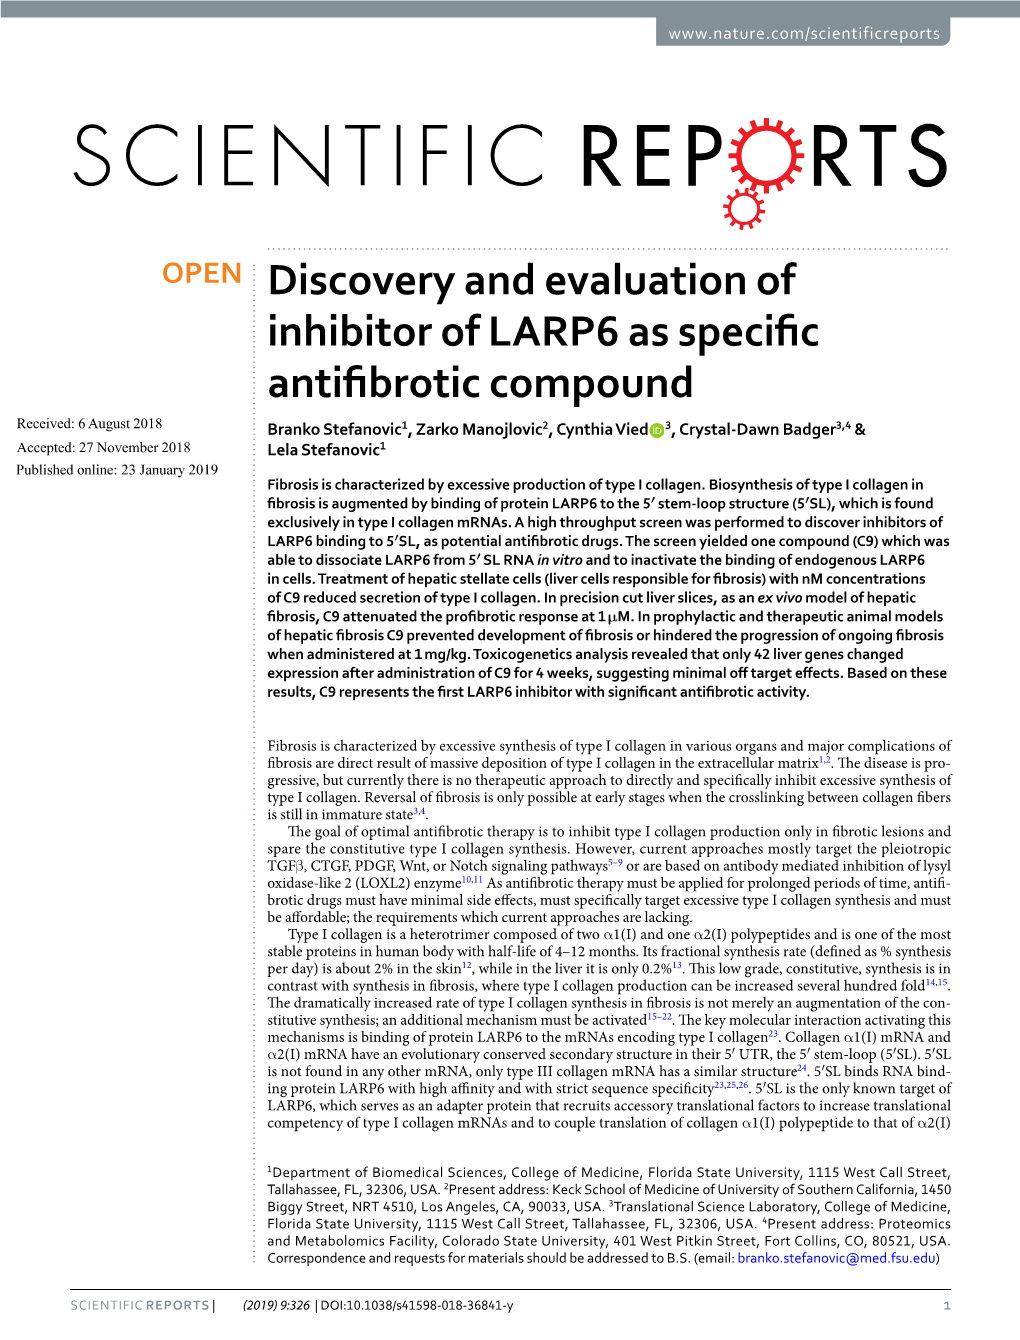 Discovery and Evaluation of Inhibitor of LARP6 As Specific Antifibrotic